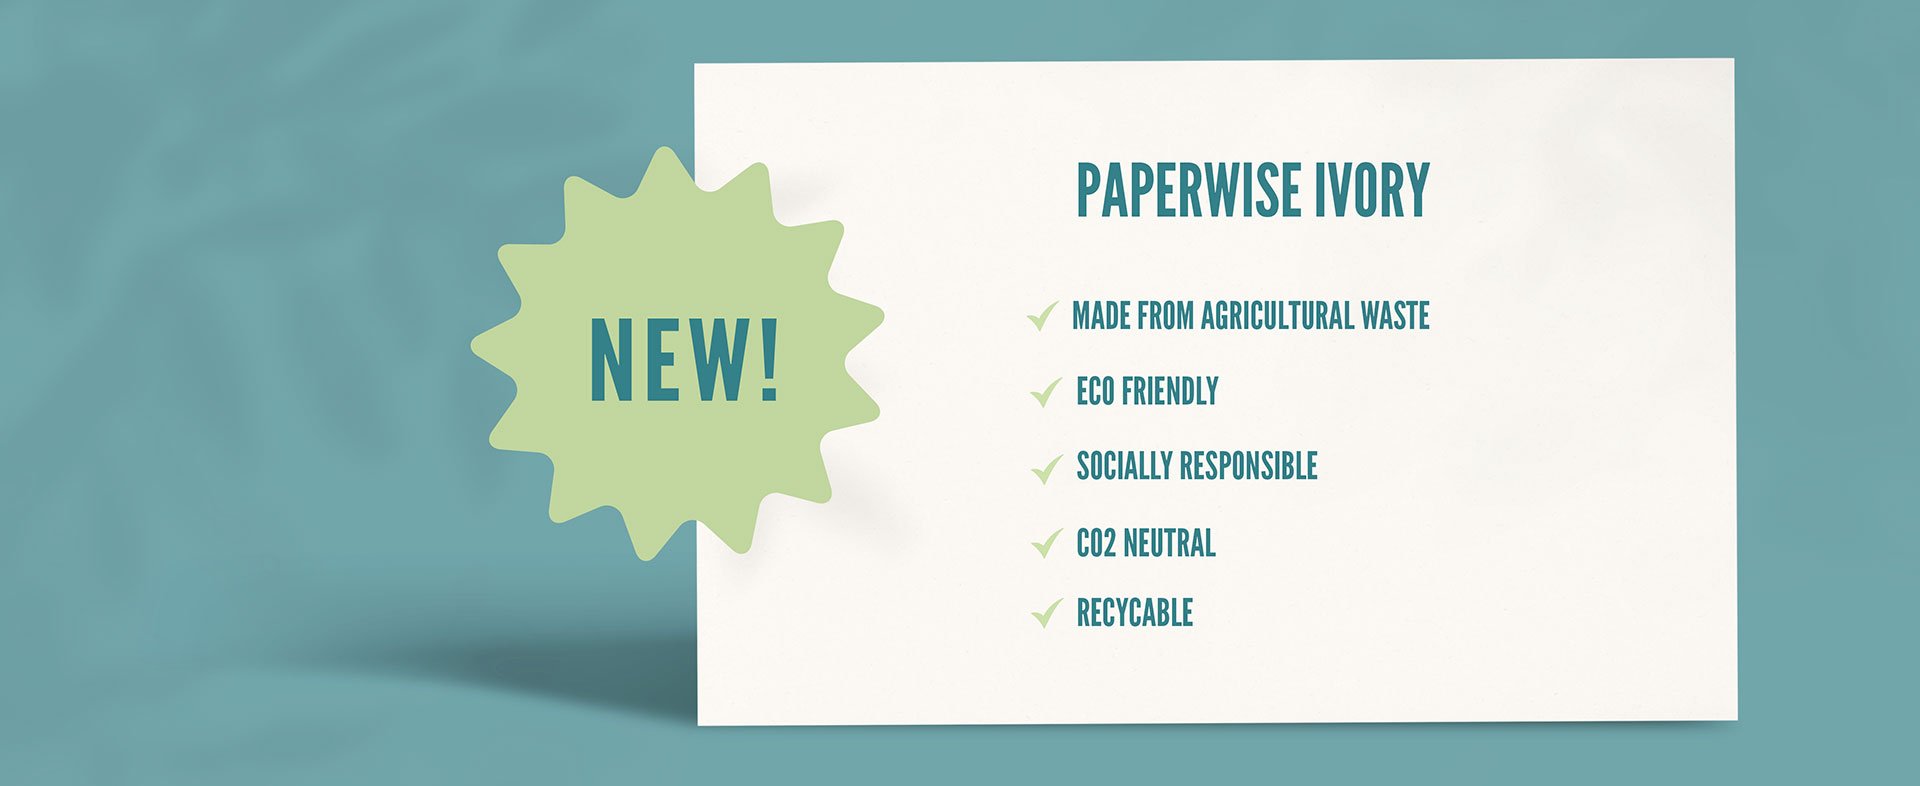 NEW! PAPERWISE IVORY: ENVIRONMENTALLY FRIENDLY, SOCIALLY RESPONSIBLE BOARD MADE FROM AGRICULTURAL WASTE